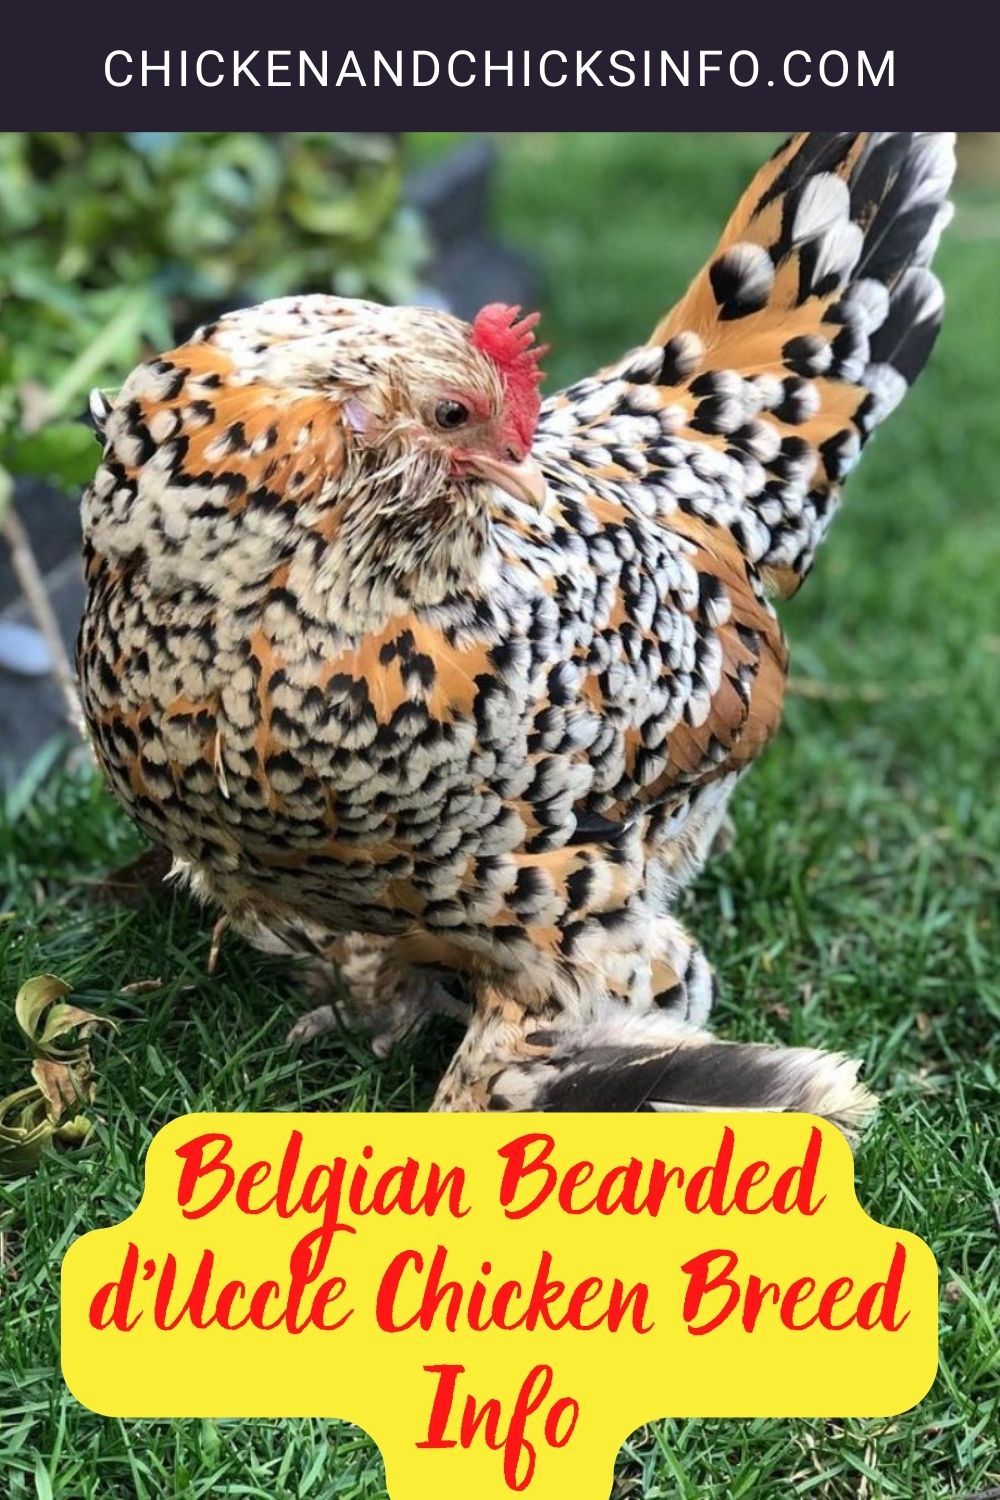 Belgian Bearded d’Uccle Chicken Breed Info+ Where to Buy pinterest image.